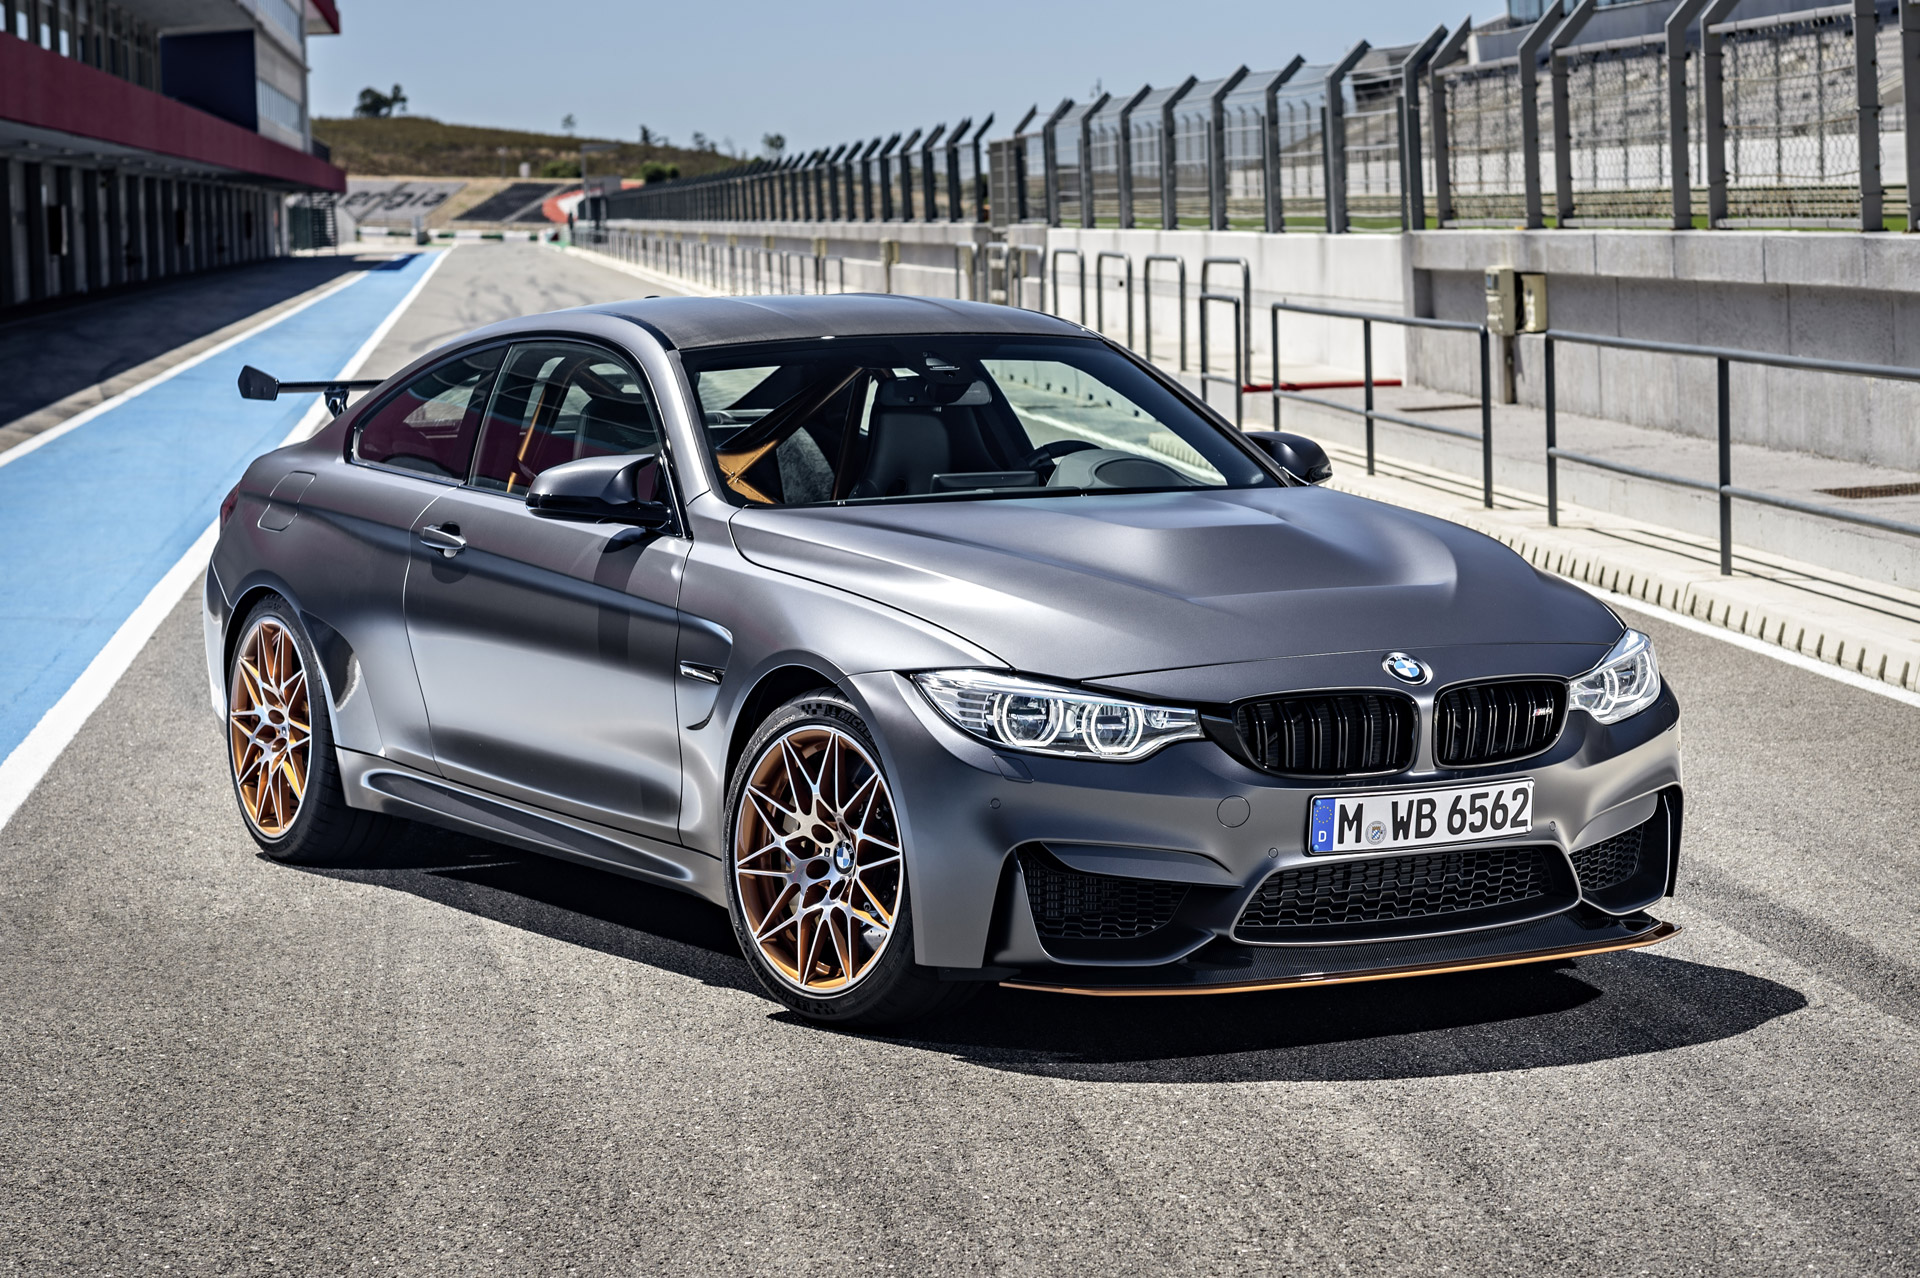 2016 Bmw M4 Gts Comes With Water Injection System 493 Horsepower